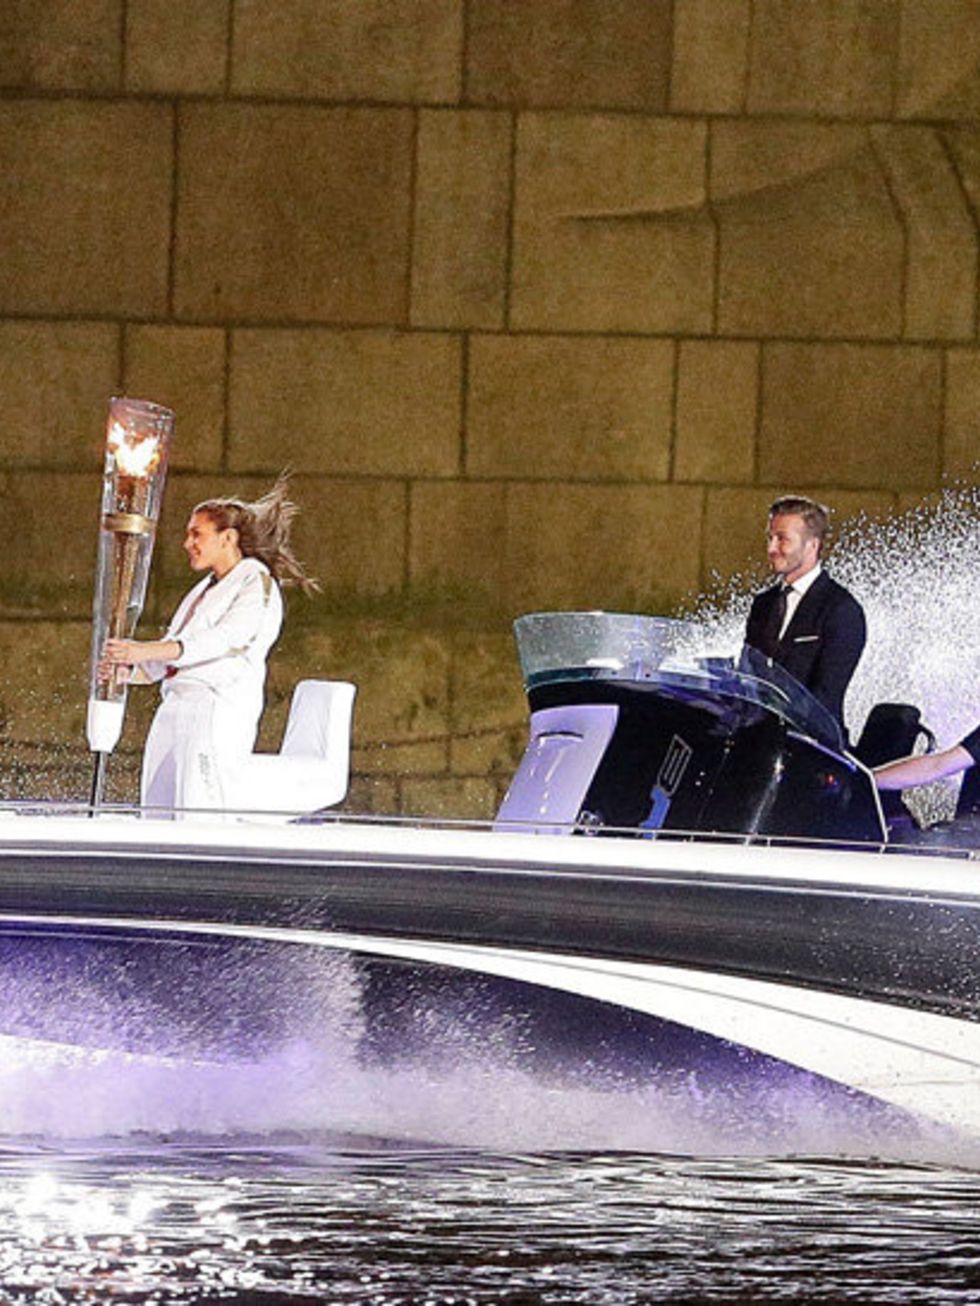 <p>David Beckham is the captain of the ship as he drives a speedboat with the Olympic flame down the river Thames as part of the 2012 Olympic Opening Ceremony Celebrations.</p>